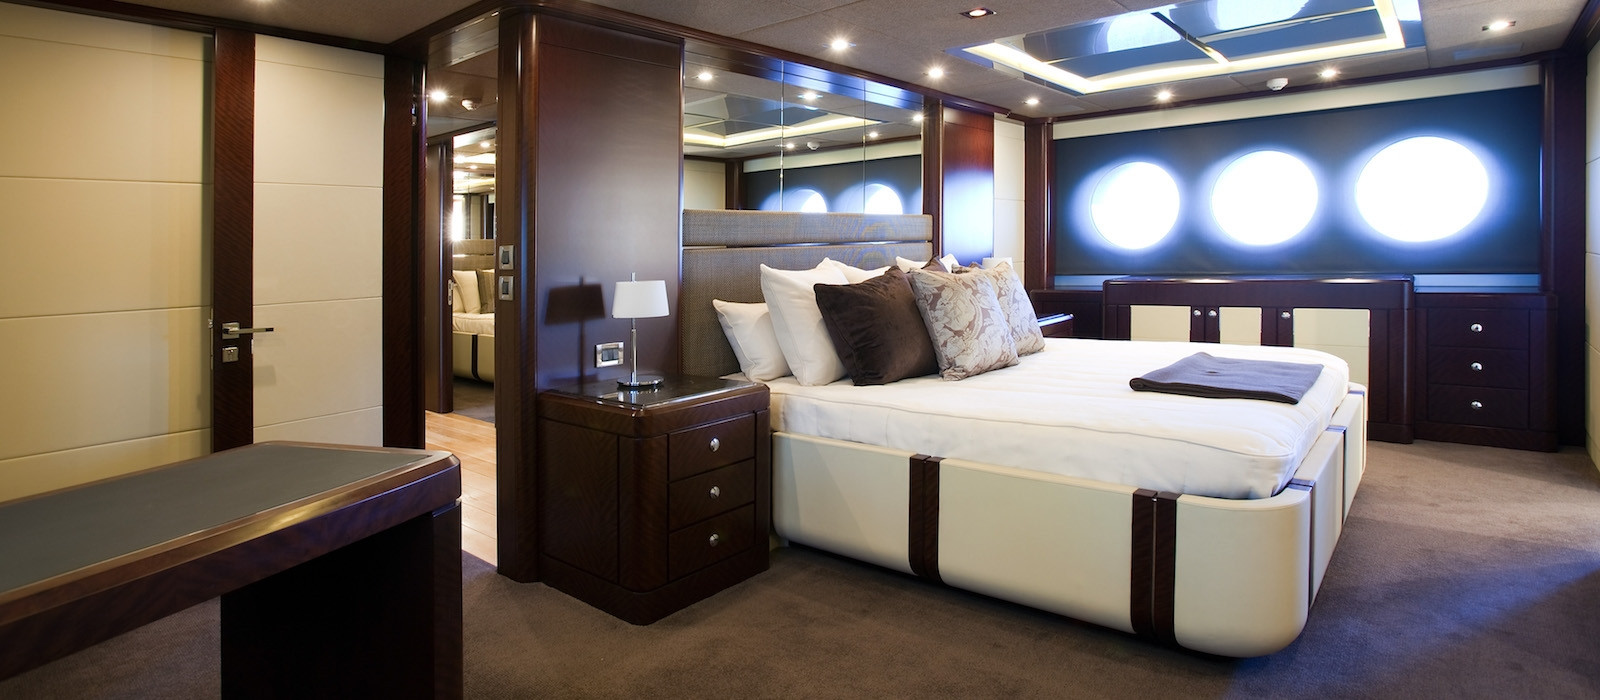 Master stateroom available on Quantum super yacht hire